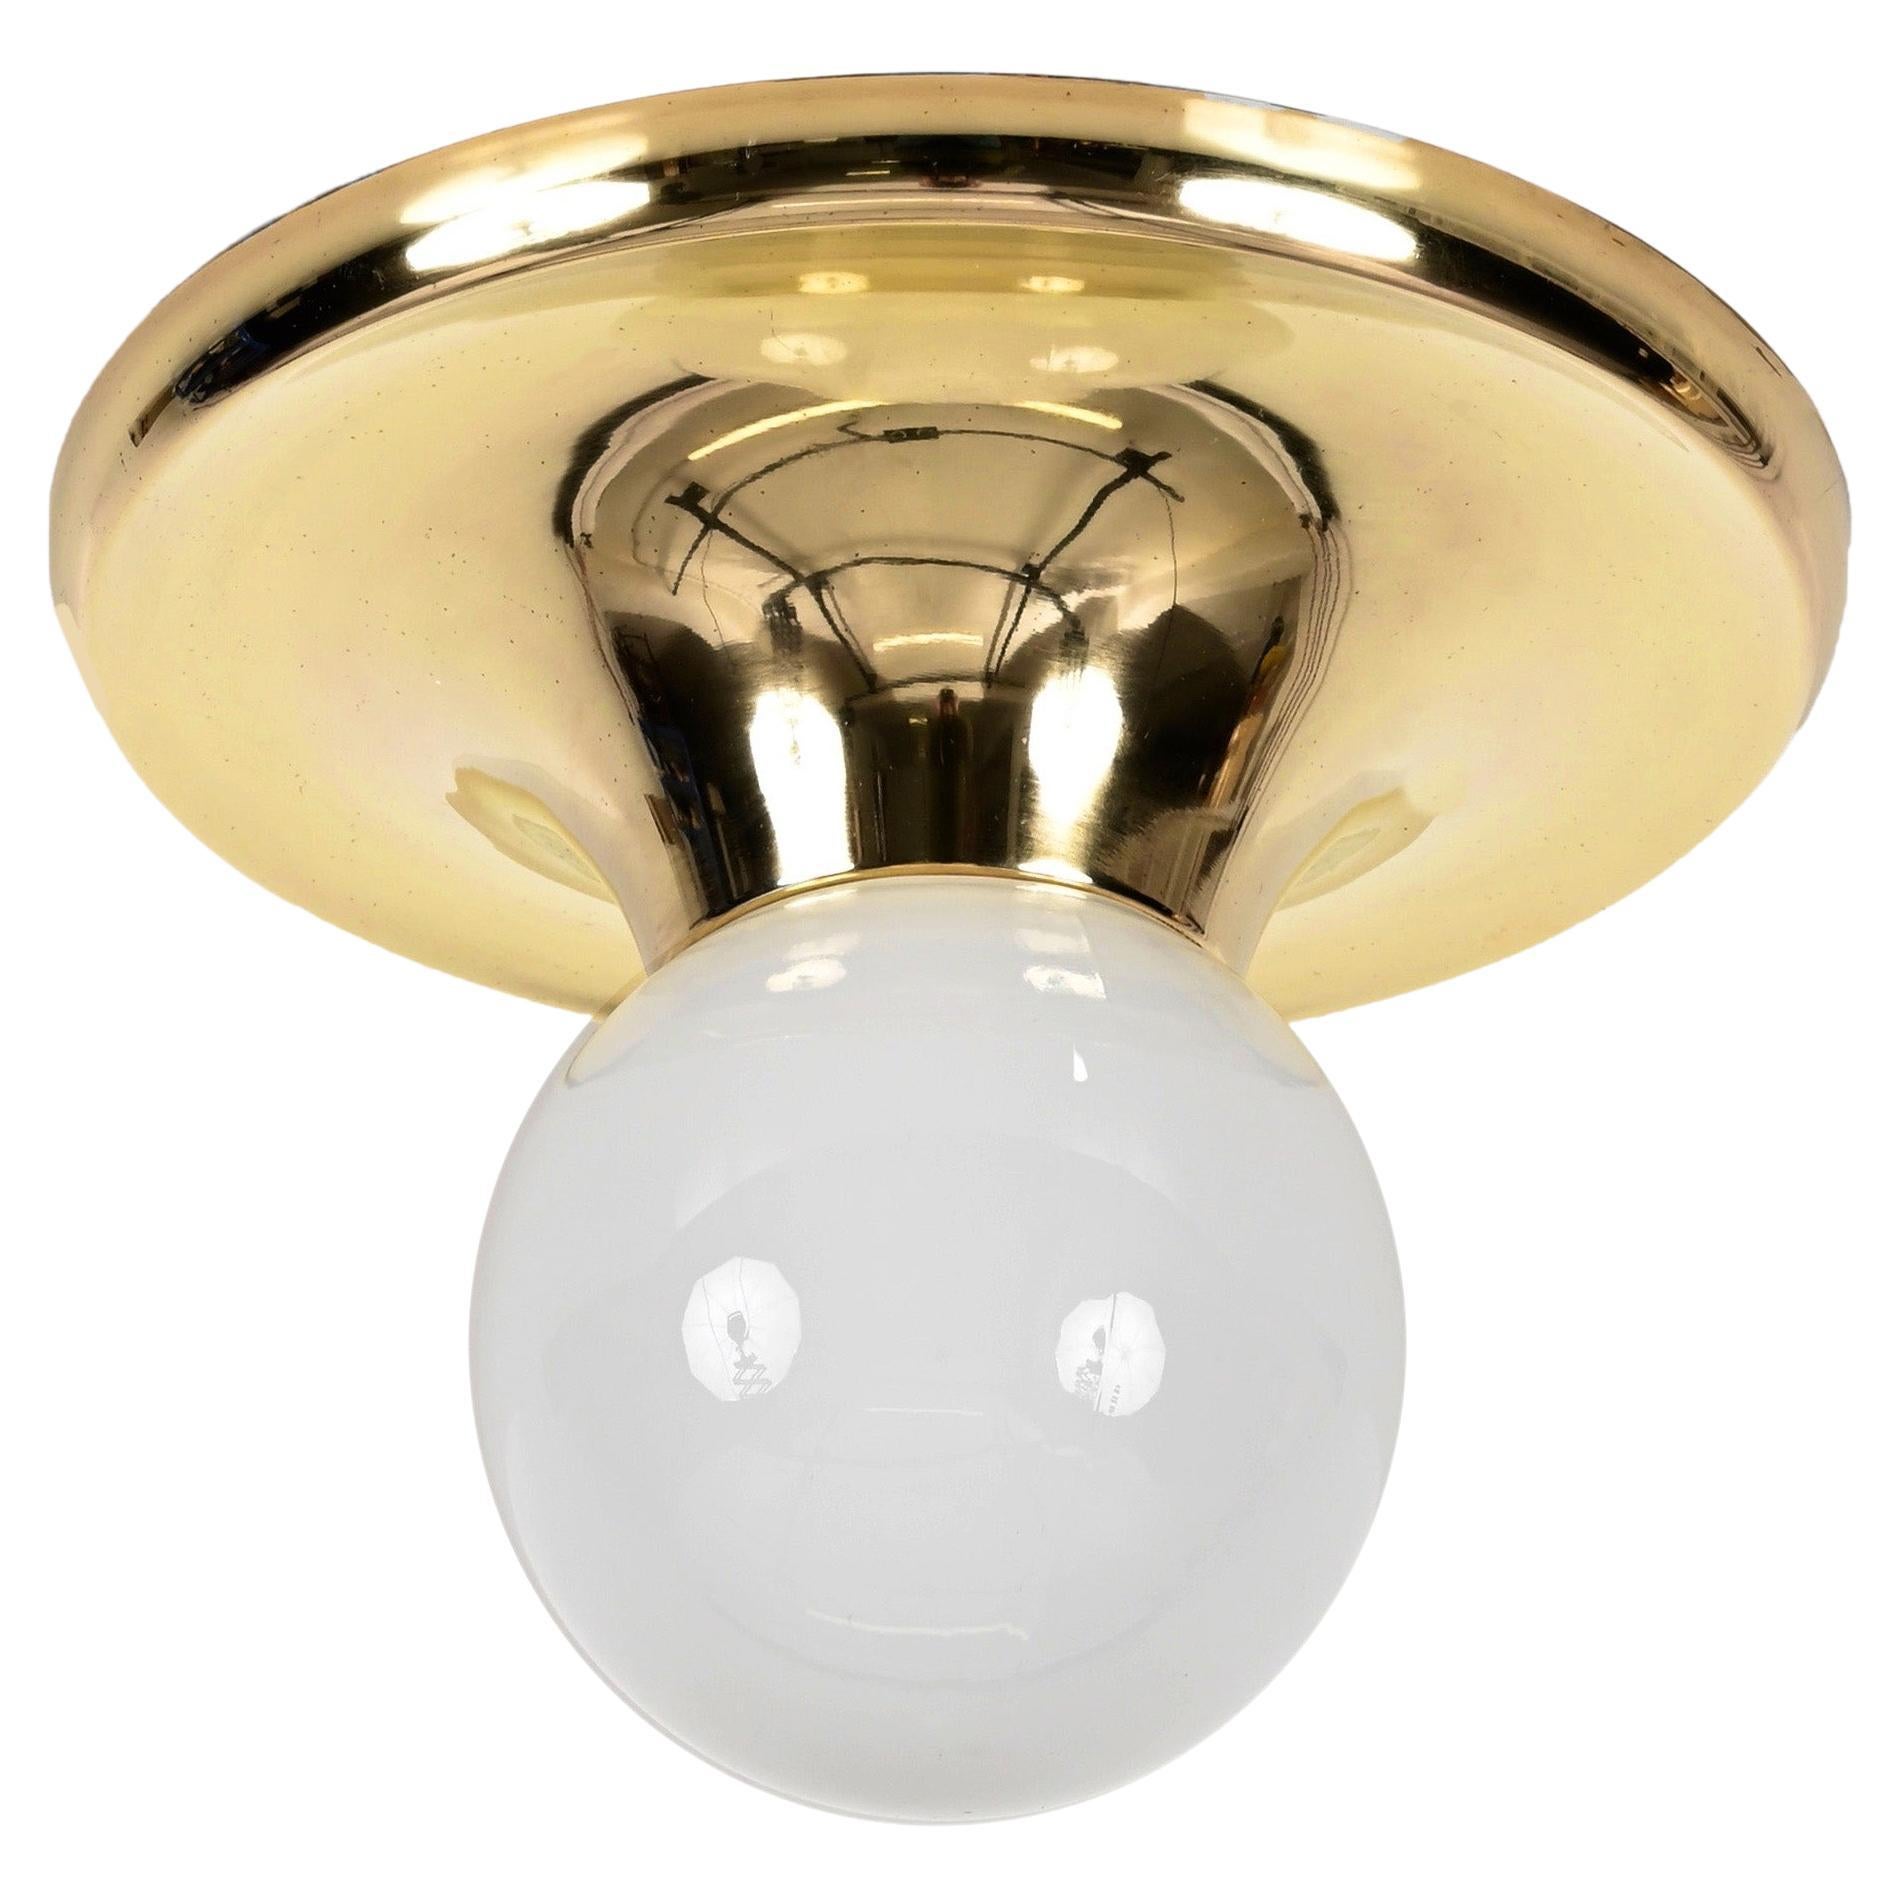  Gold Brass "Light Ball" by Flos, Italian Wall or Ceiling Lamp, Castiglioni 1960 For Sale